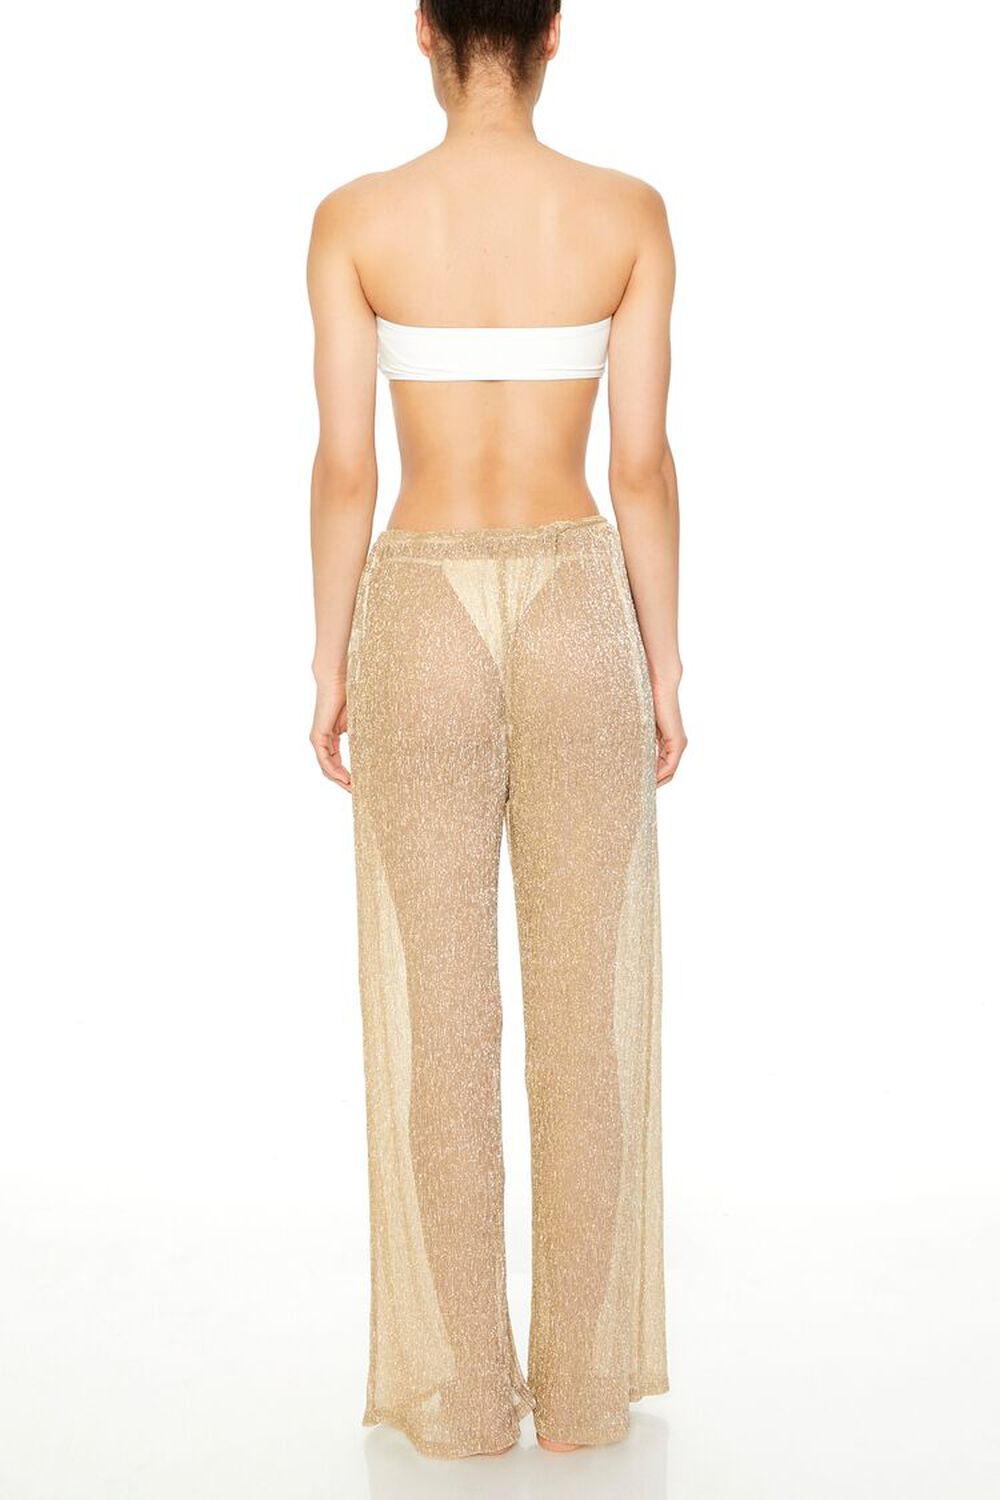 GOLD Shimmery Swim Cover-Up Pants, image 3